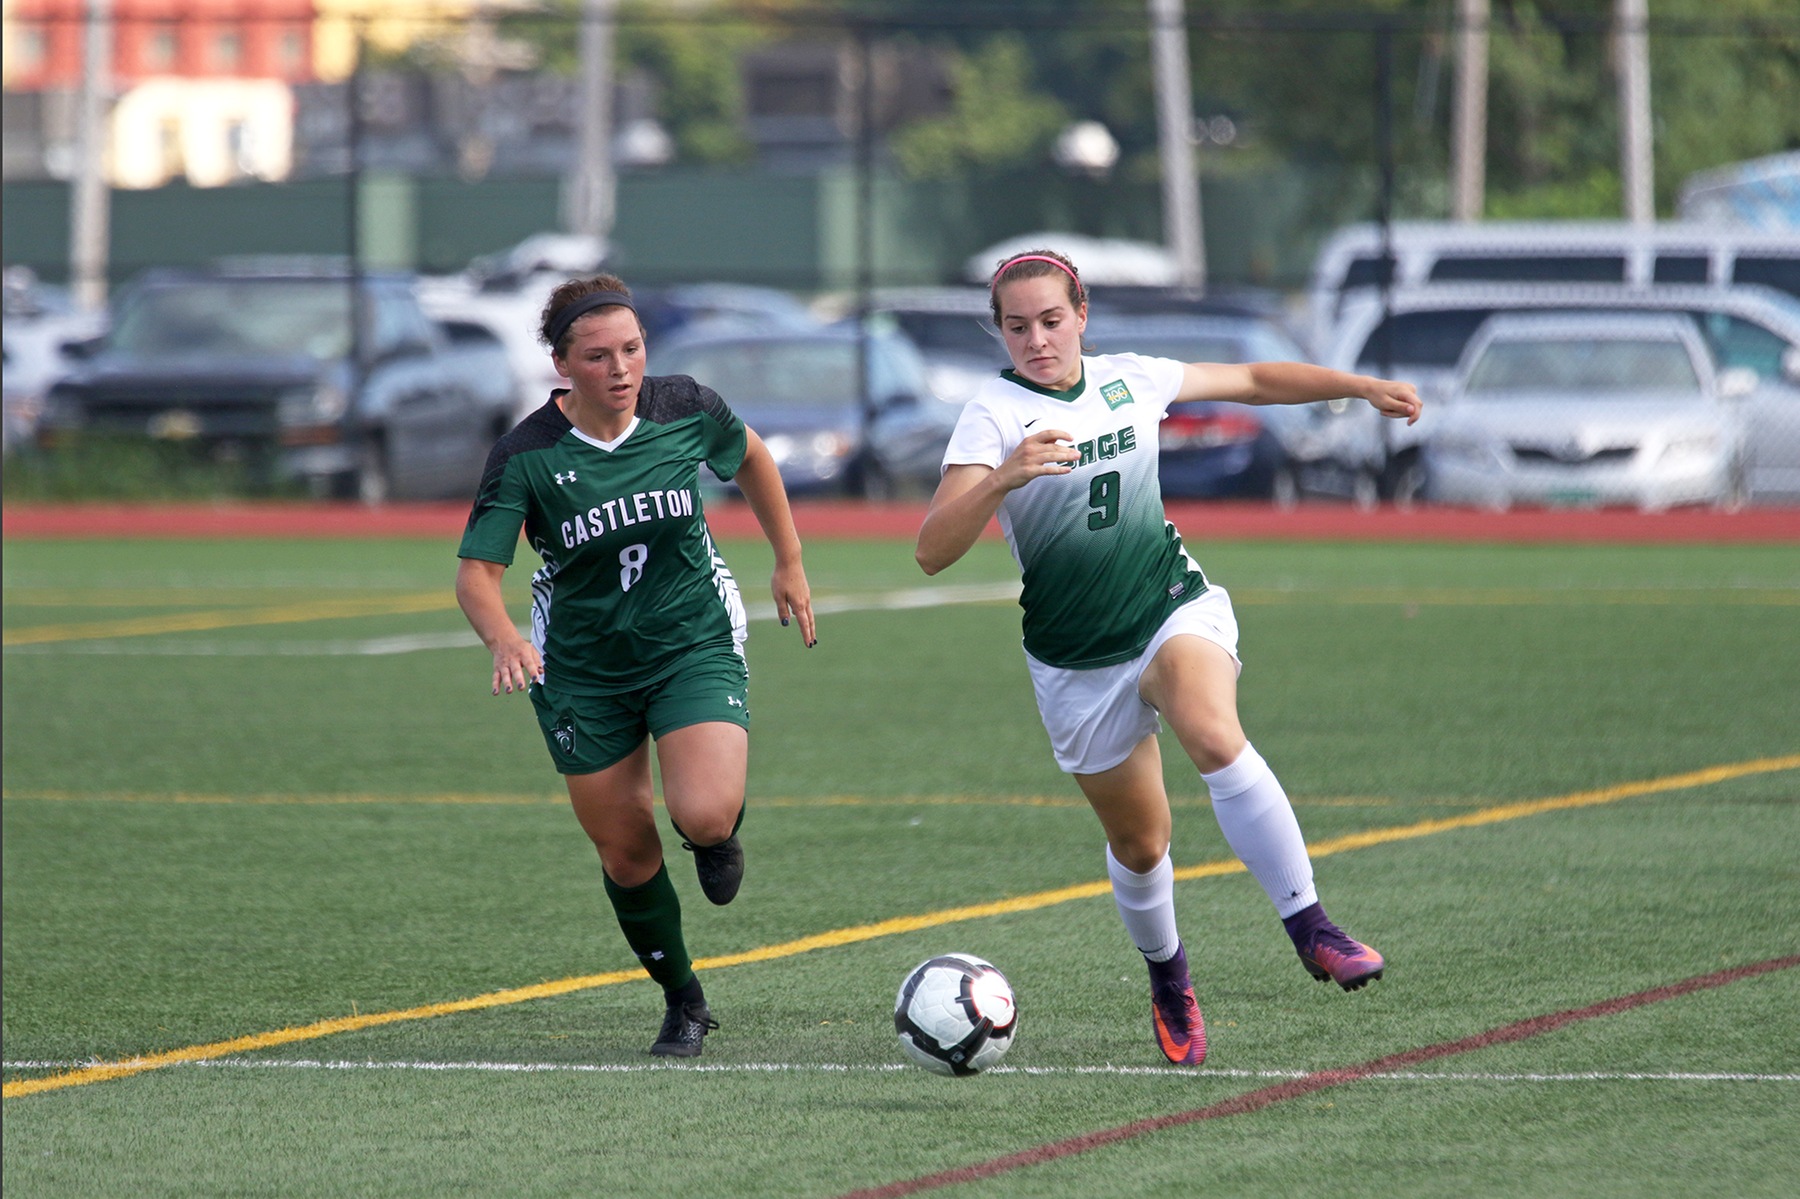 Fesette leads Sage to 4-0 start with 1-0 win over MCLA